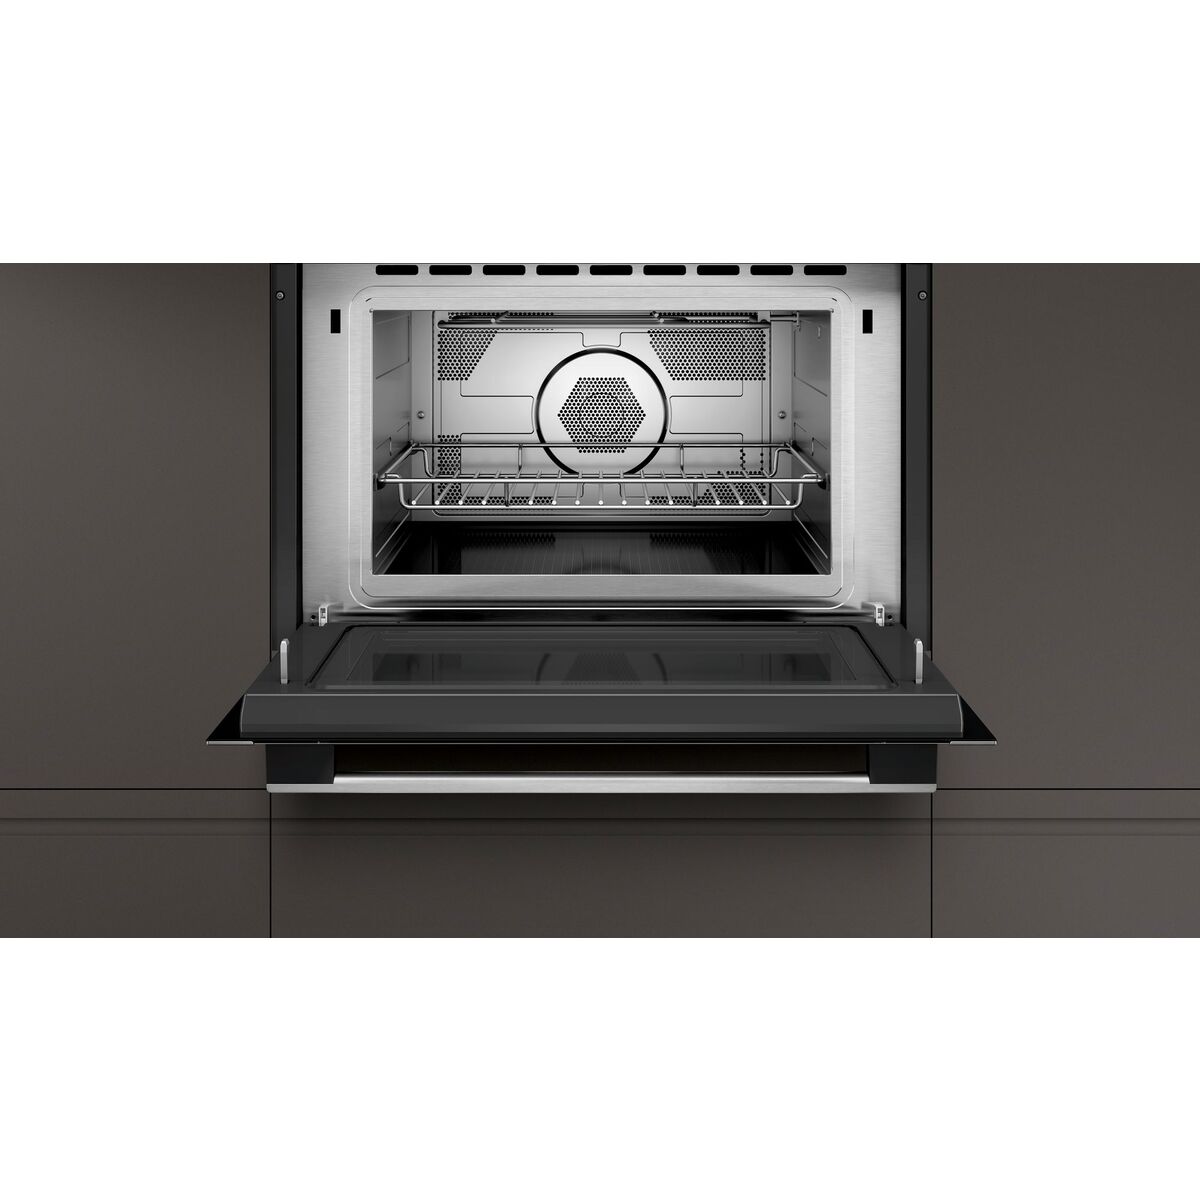 Image of NEFF C1AMG84N0B Built-in compact Oven with Microwave Function